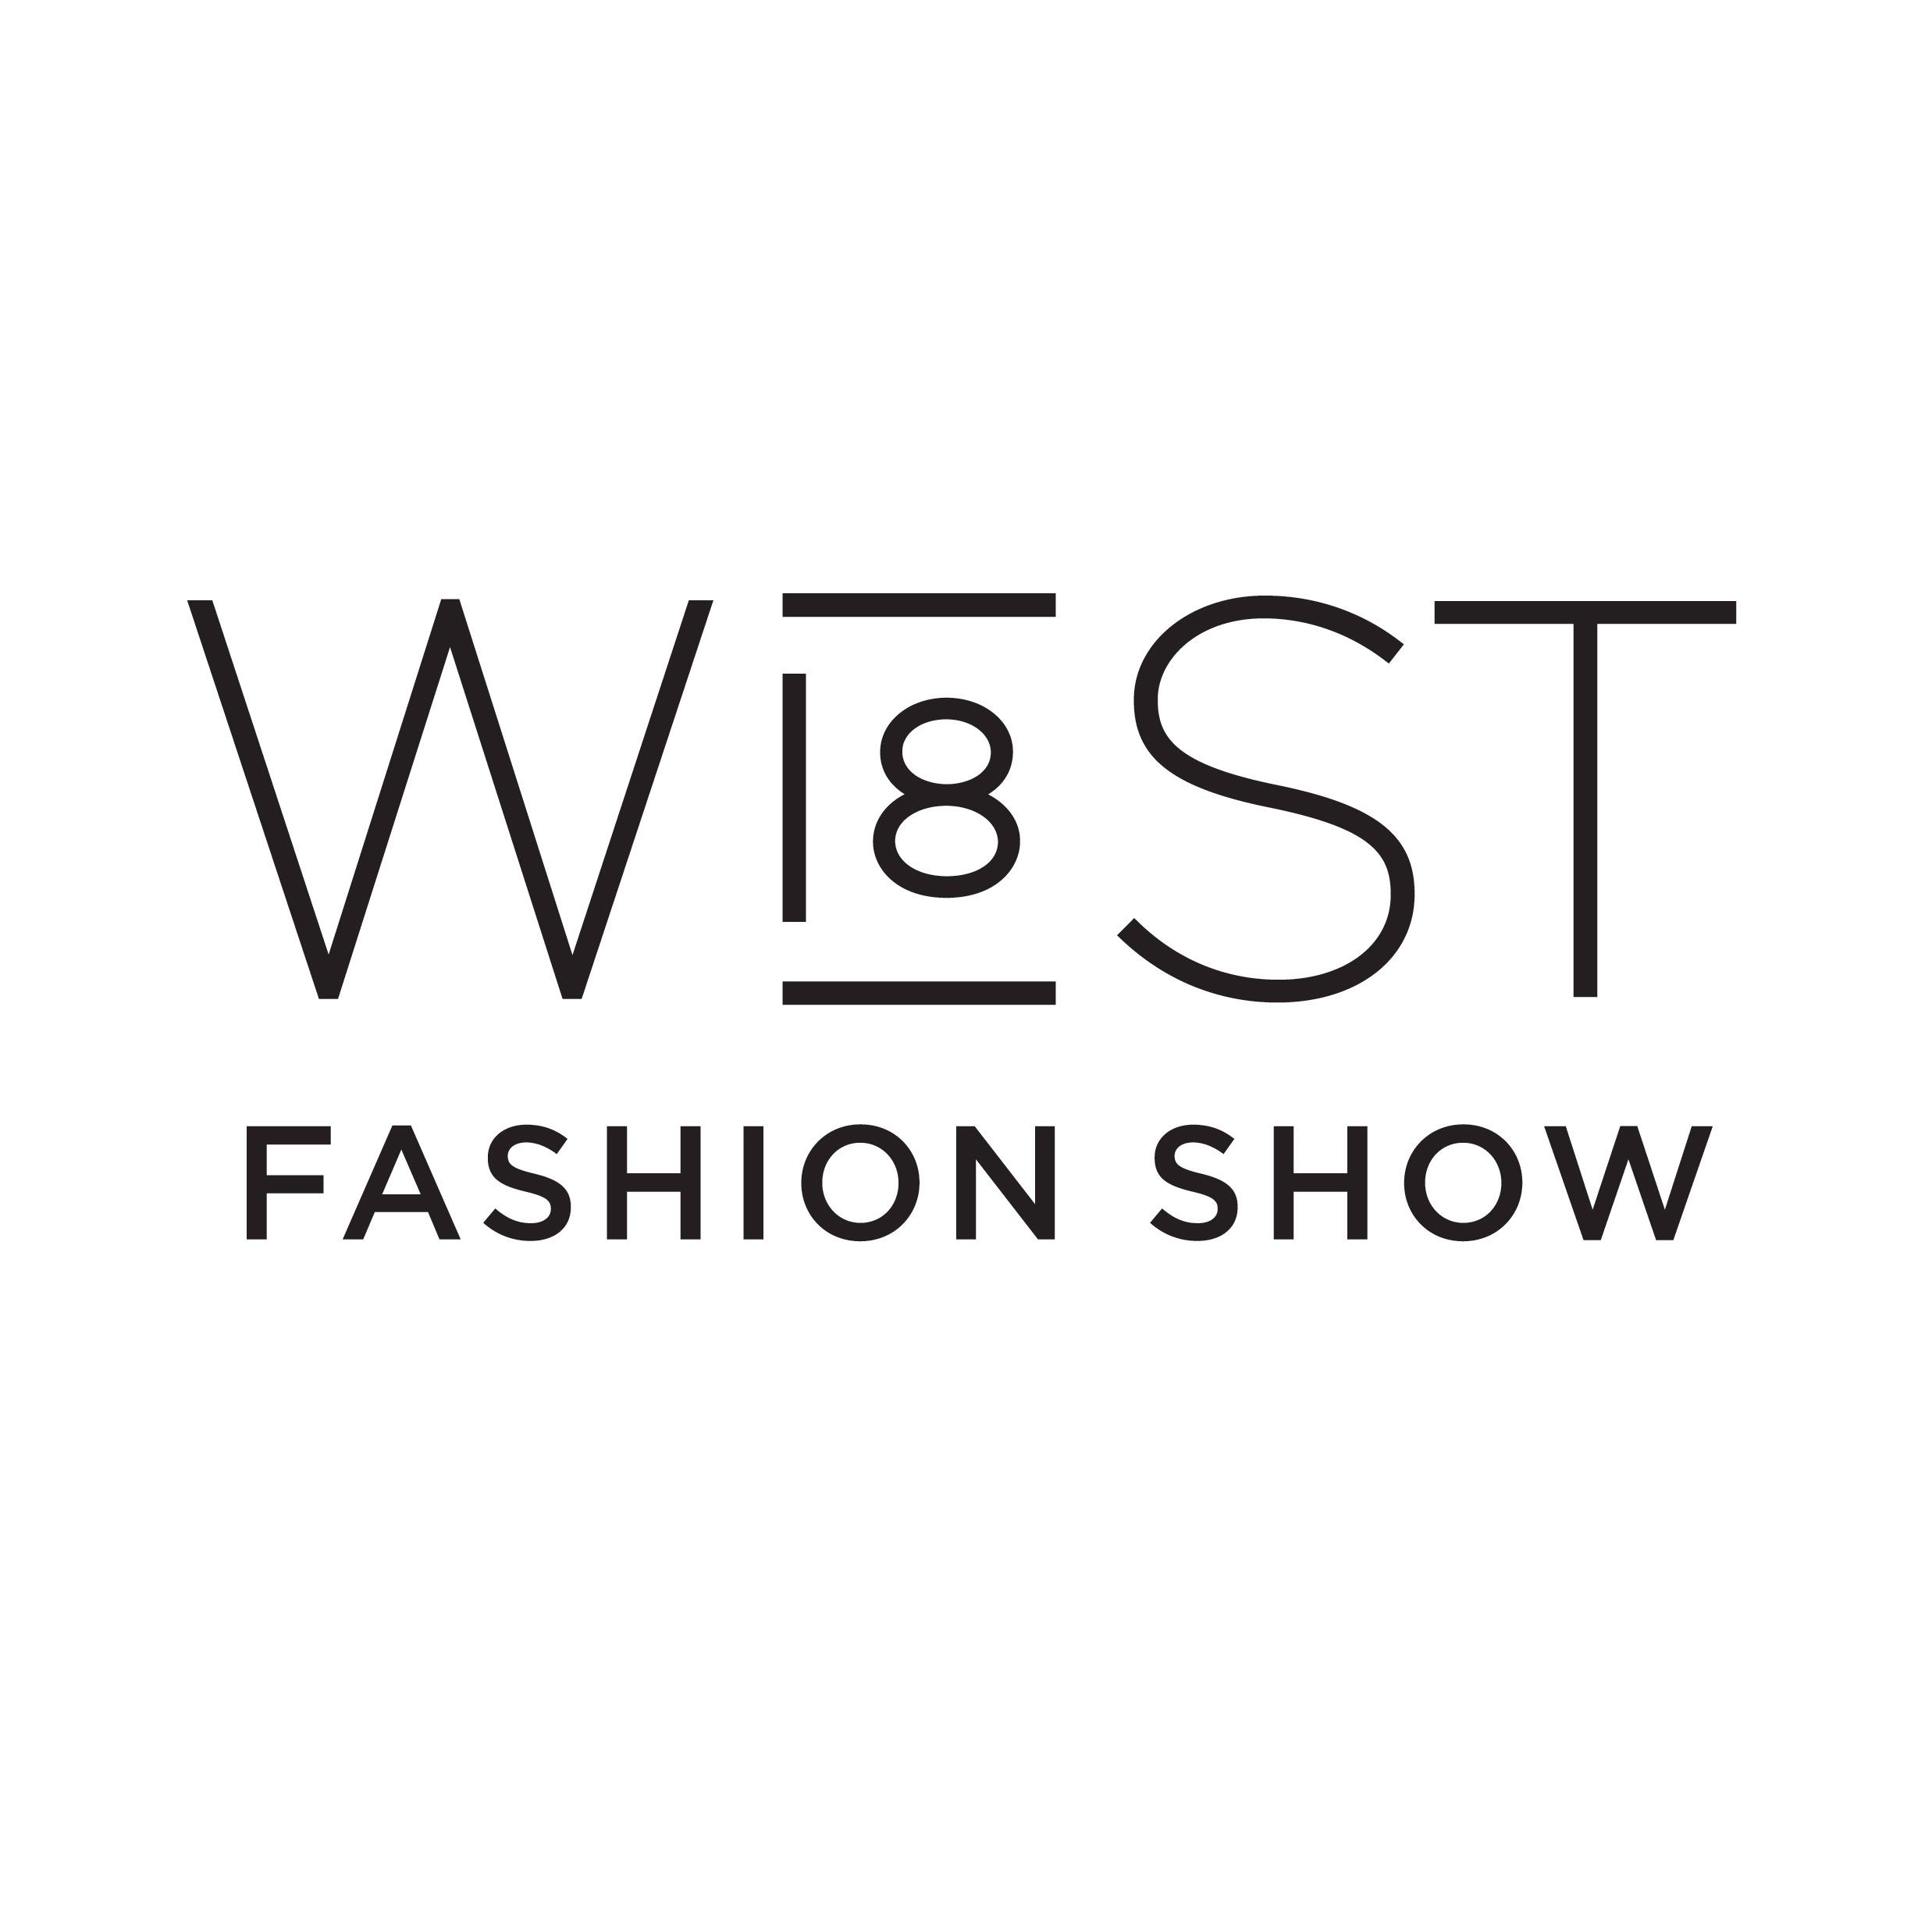 West 18th Street Fashion Show | Founded in 2000 | #west18thstreetfashionshow